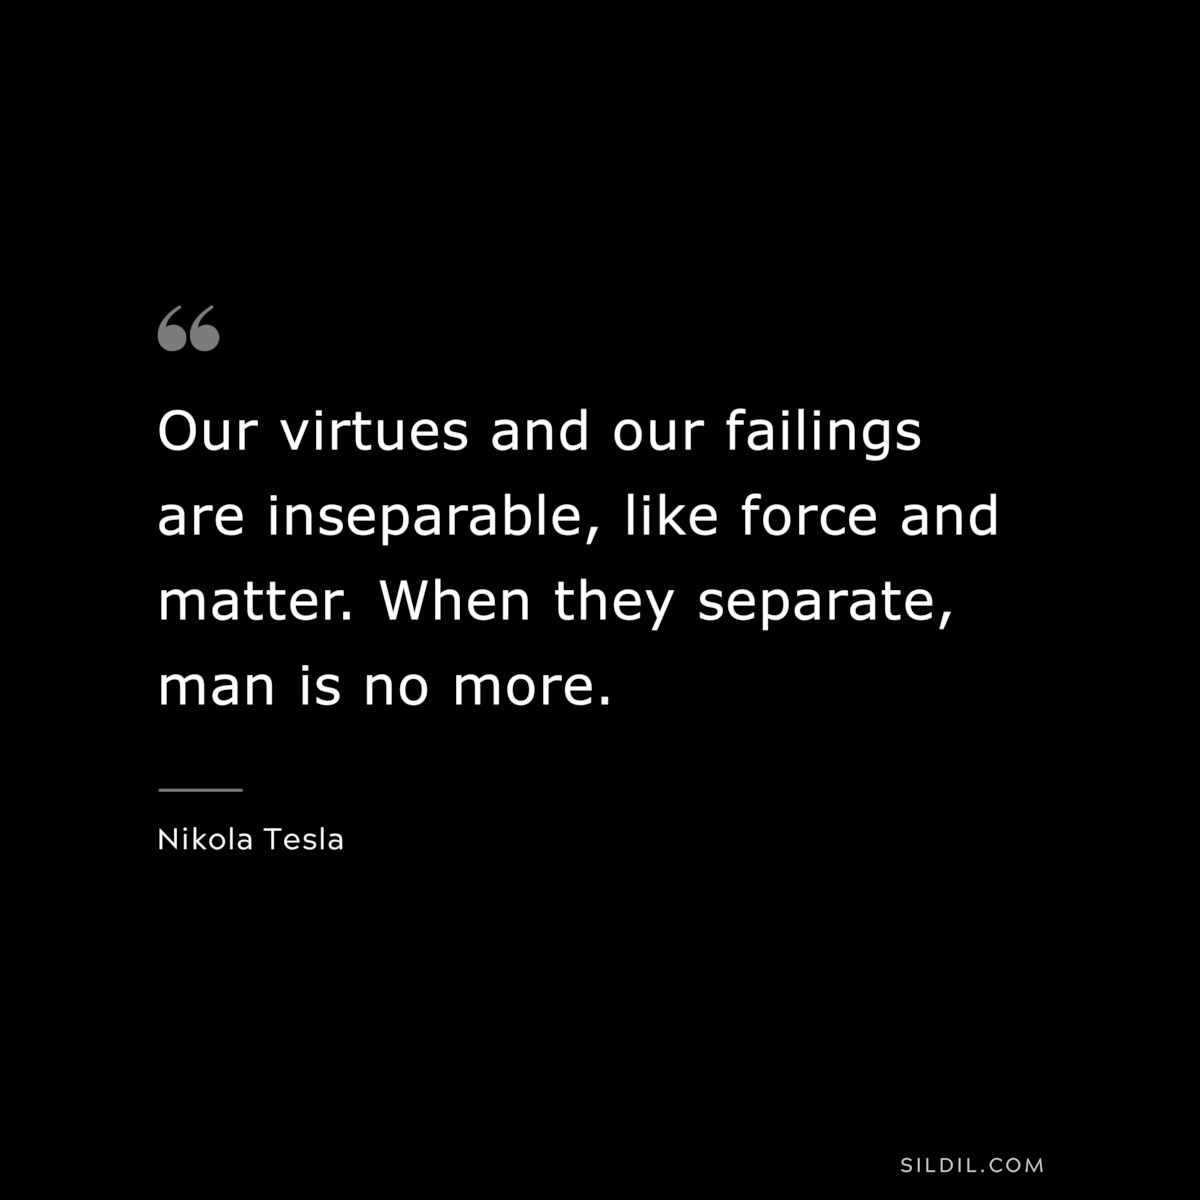 Our virtues and our failings are inseparable, like force and matter. When they separate, man is no more. ― Nikola Tesla